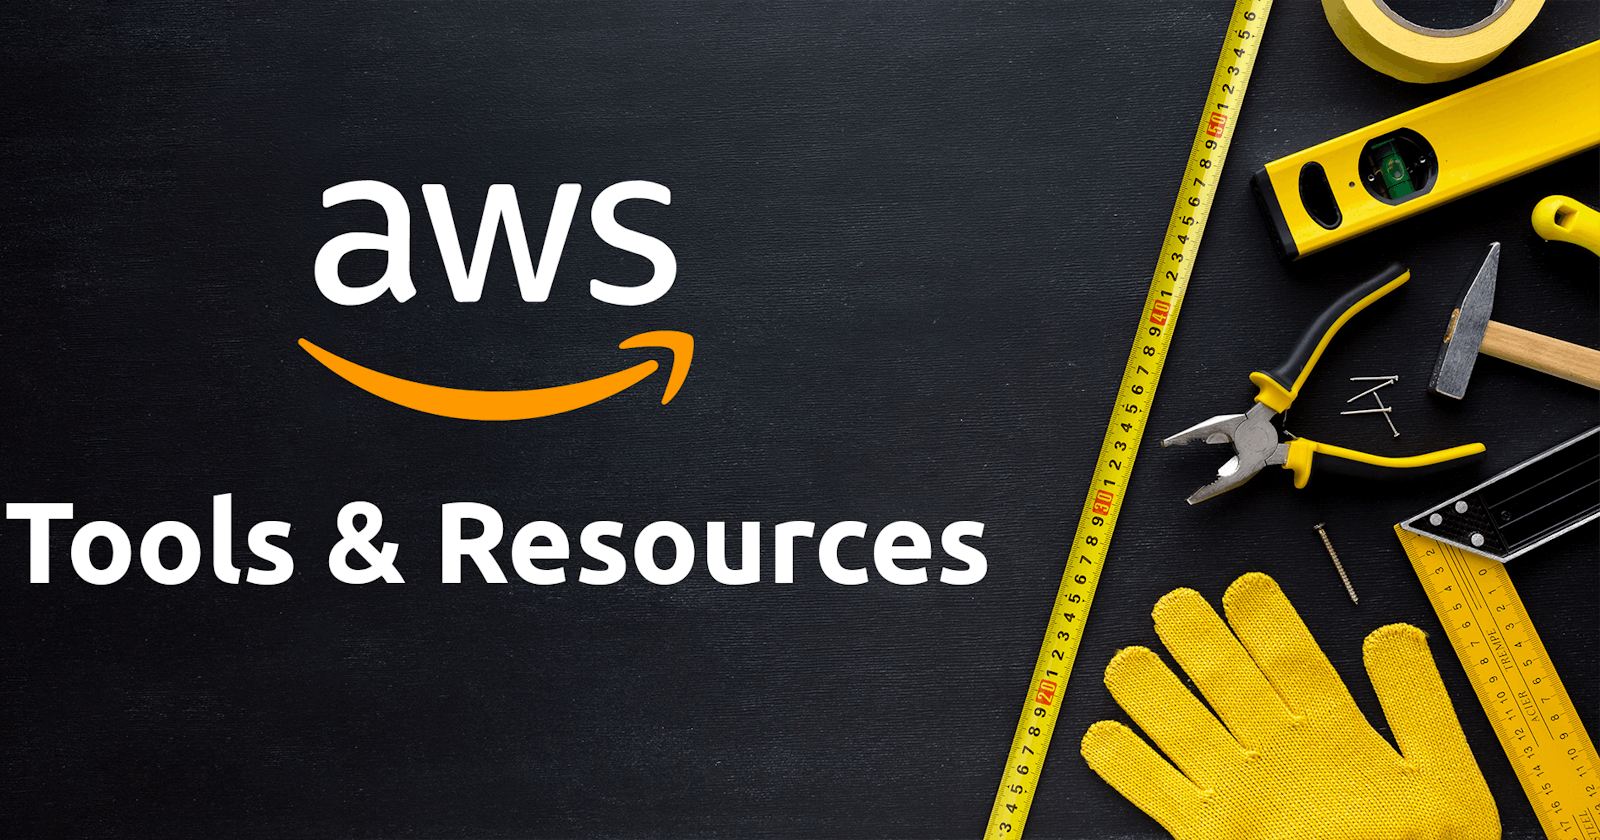 My Favorite AWS Tools and Resources that I Use Every Day